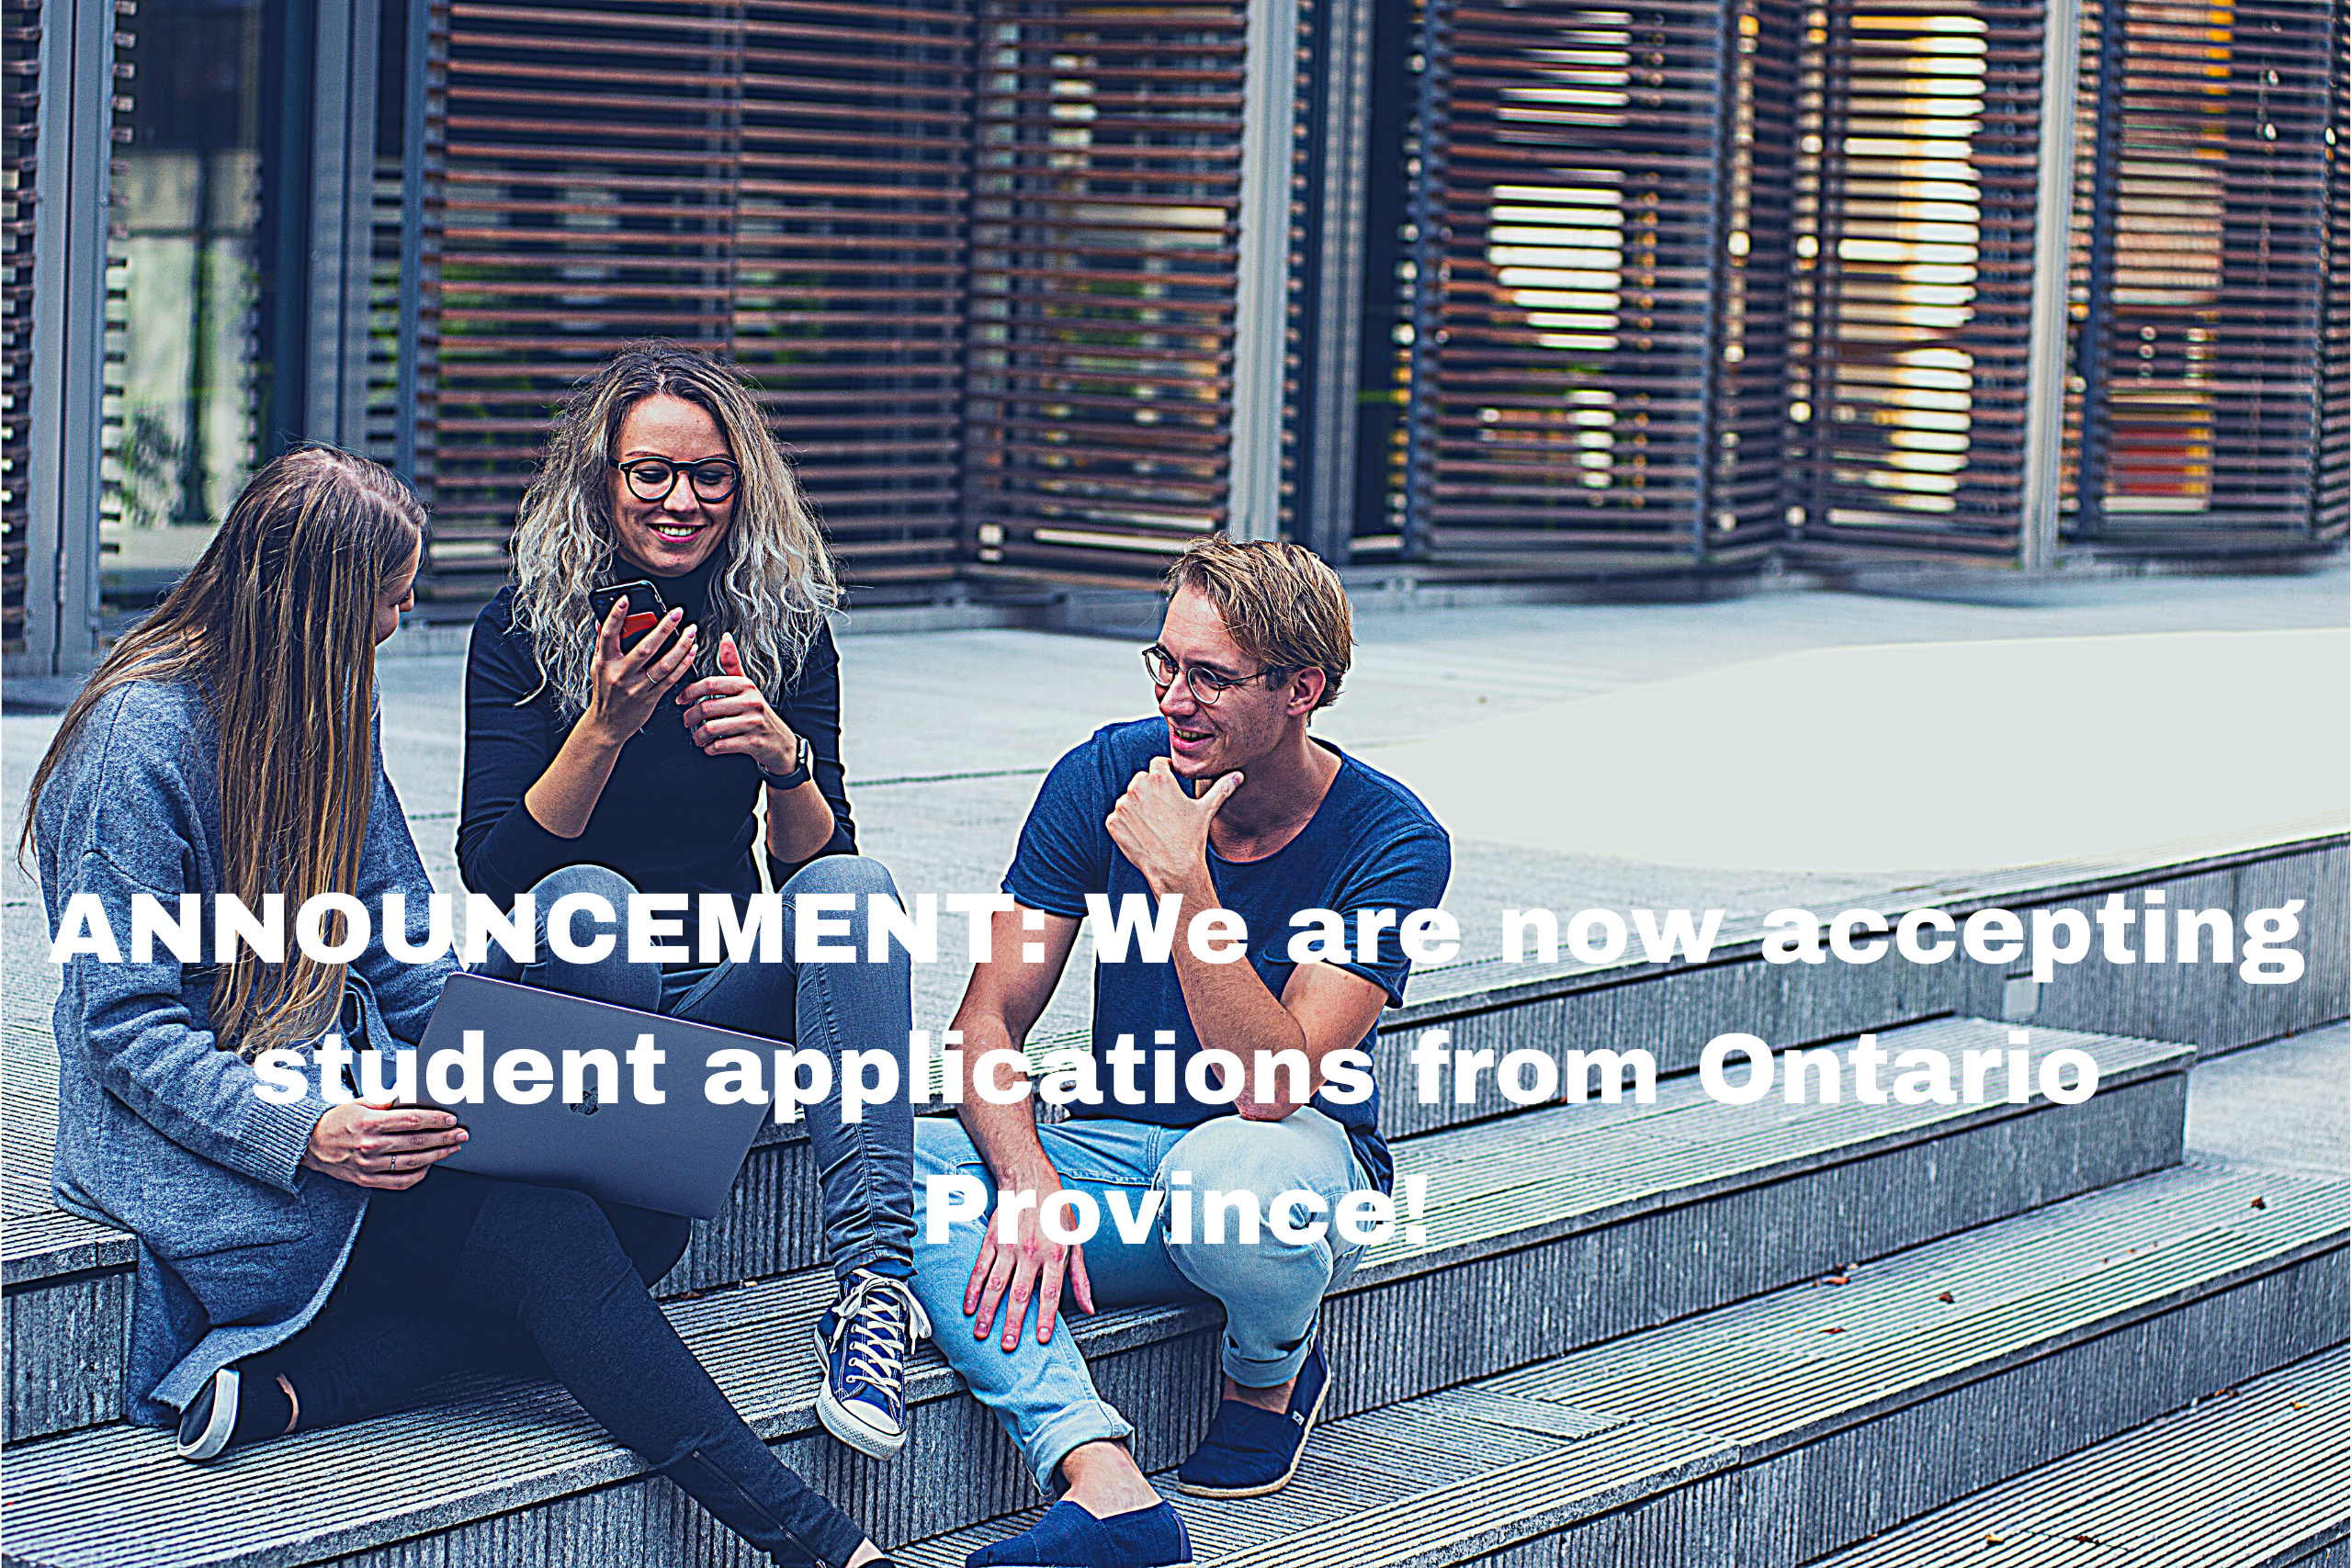 ANNOUNCEMENT_ We are now accepting student applications from Ontario Province! (1)